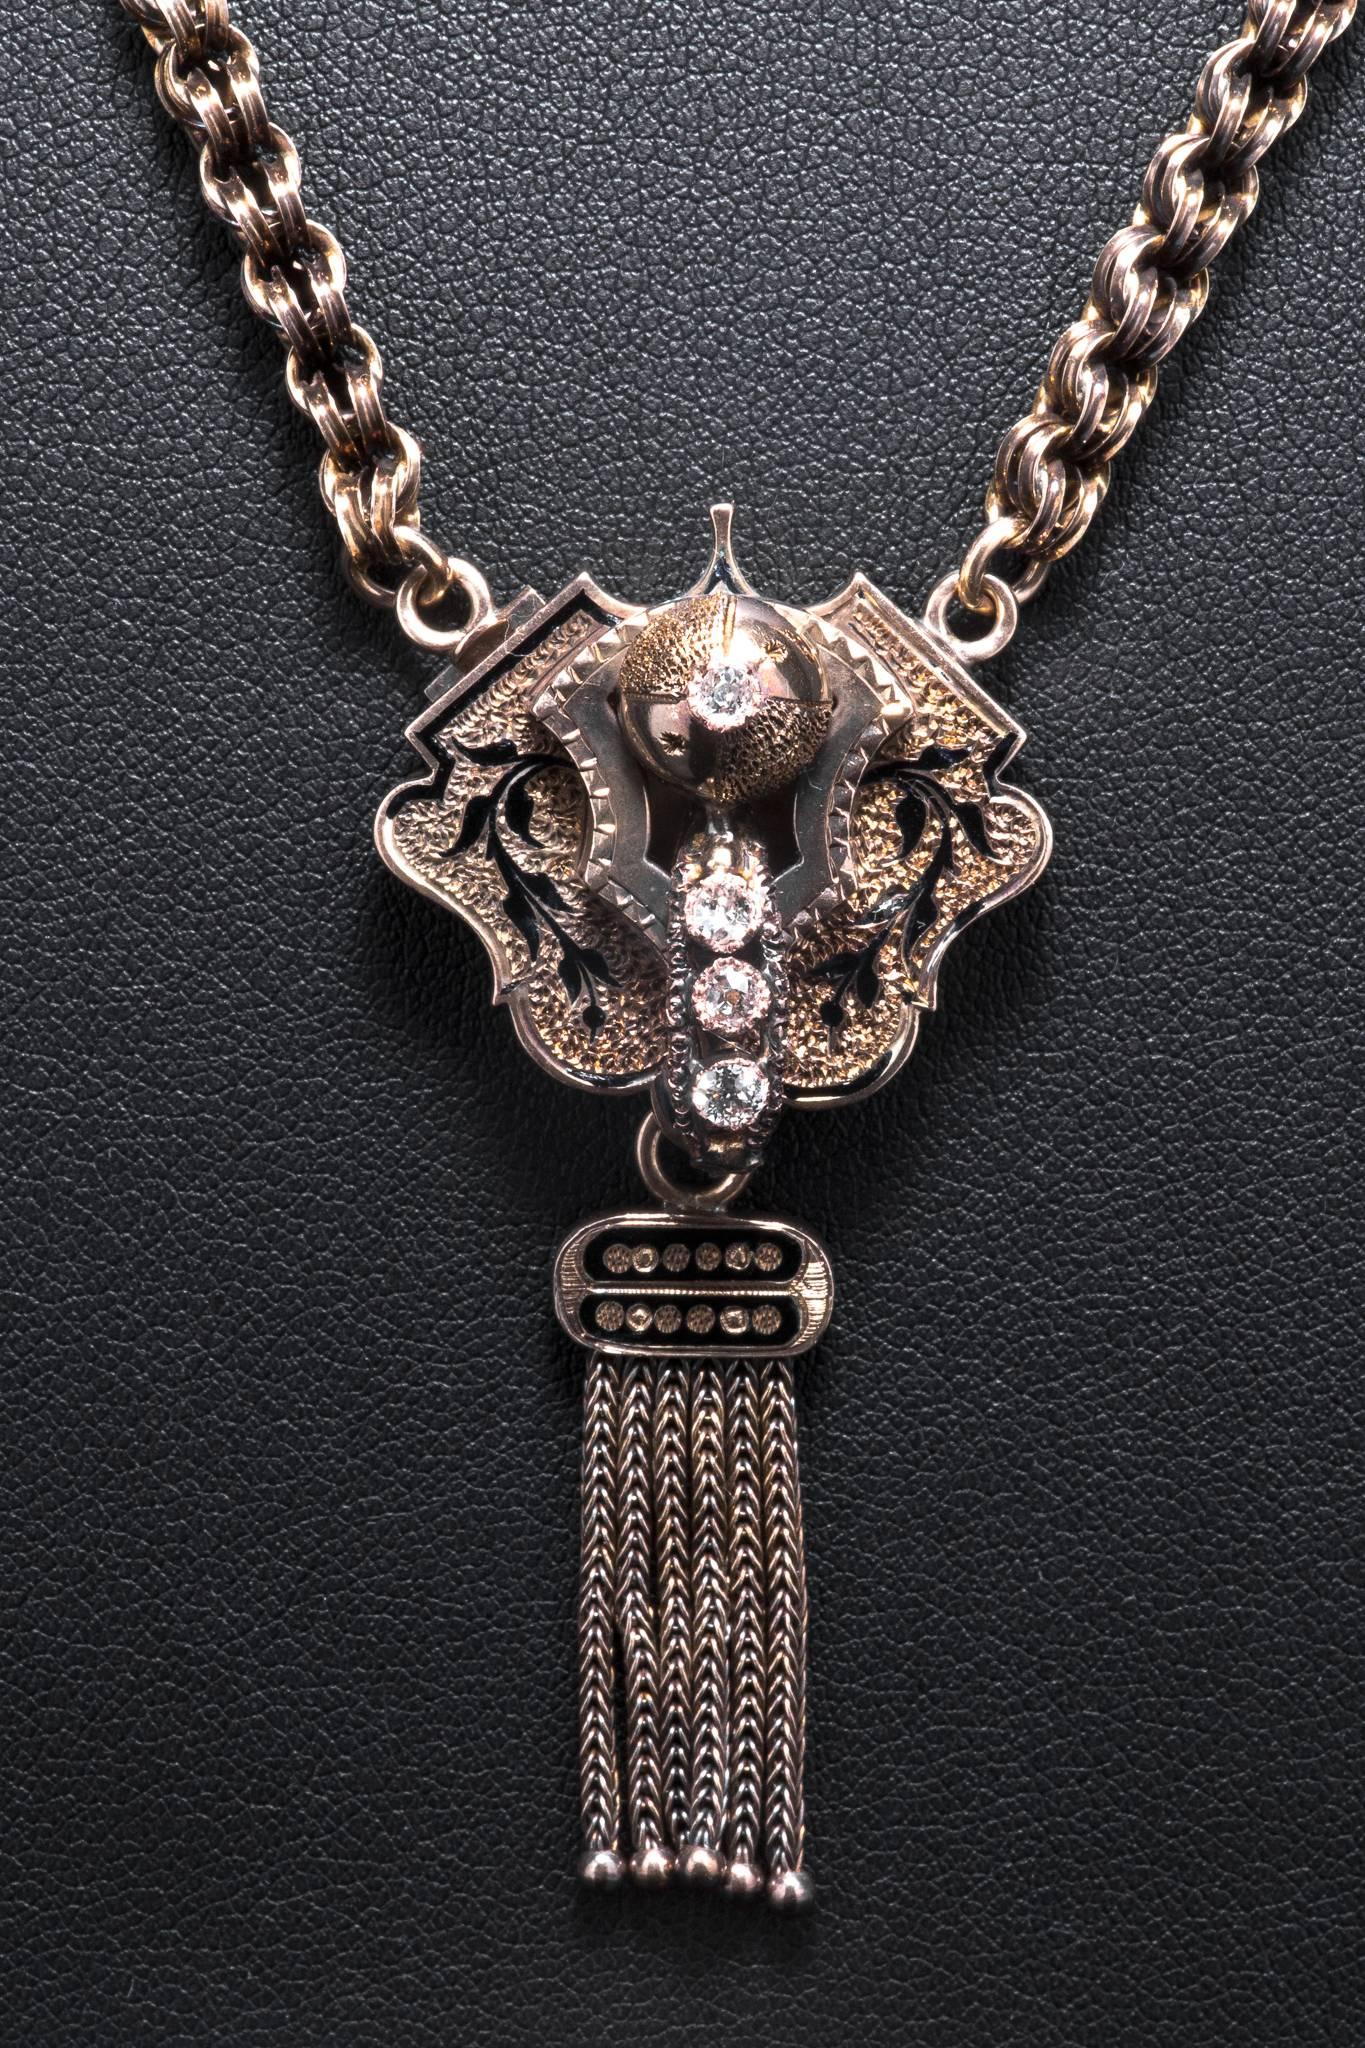 Presenting an original victorian period enamel and diamond tassel necklace in yellow gold.  Featuring rich black floral enameling and four antique mine cut diamonds this necklace also features a unique hand crafted link chain.

In excellent